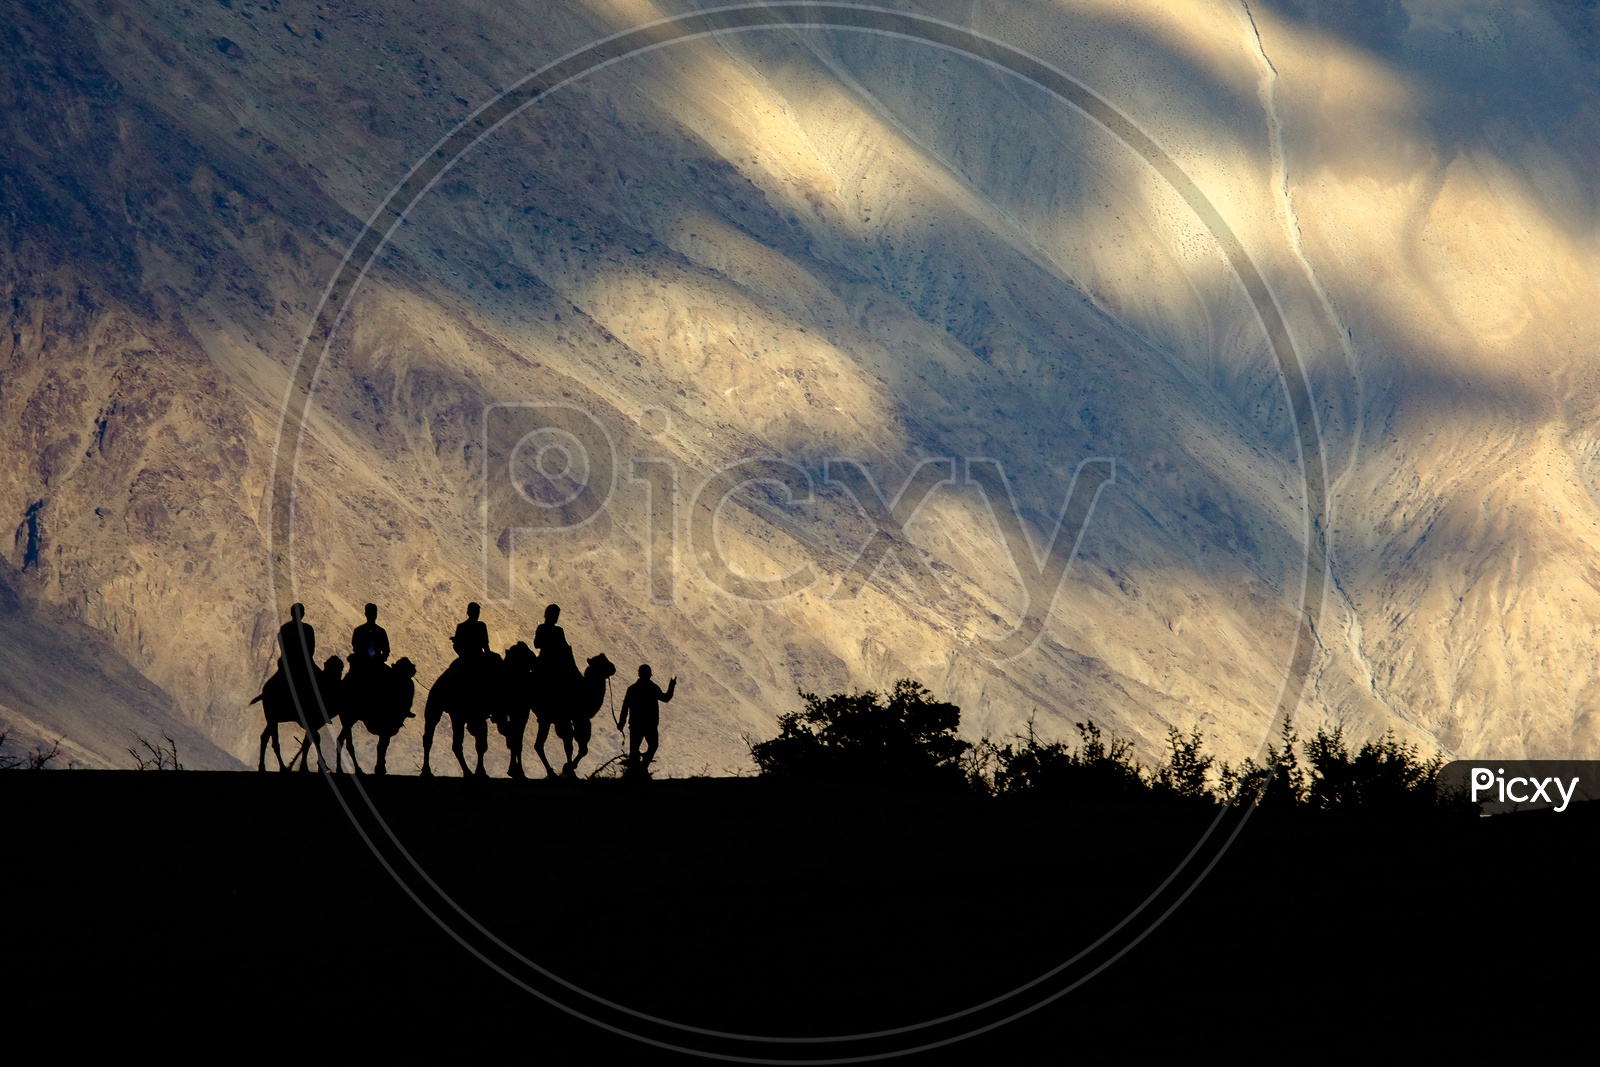 Silhouette of Camel Rides in Nubra Valley in Ladakh